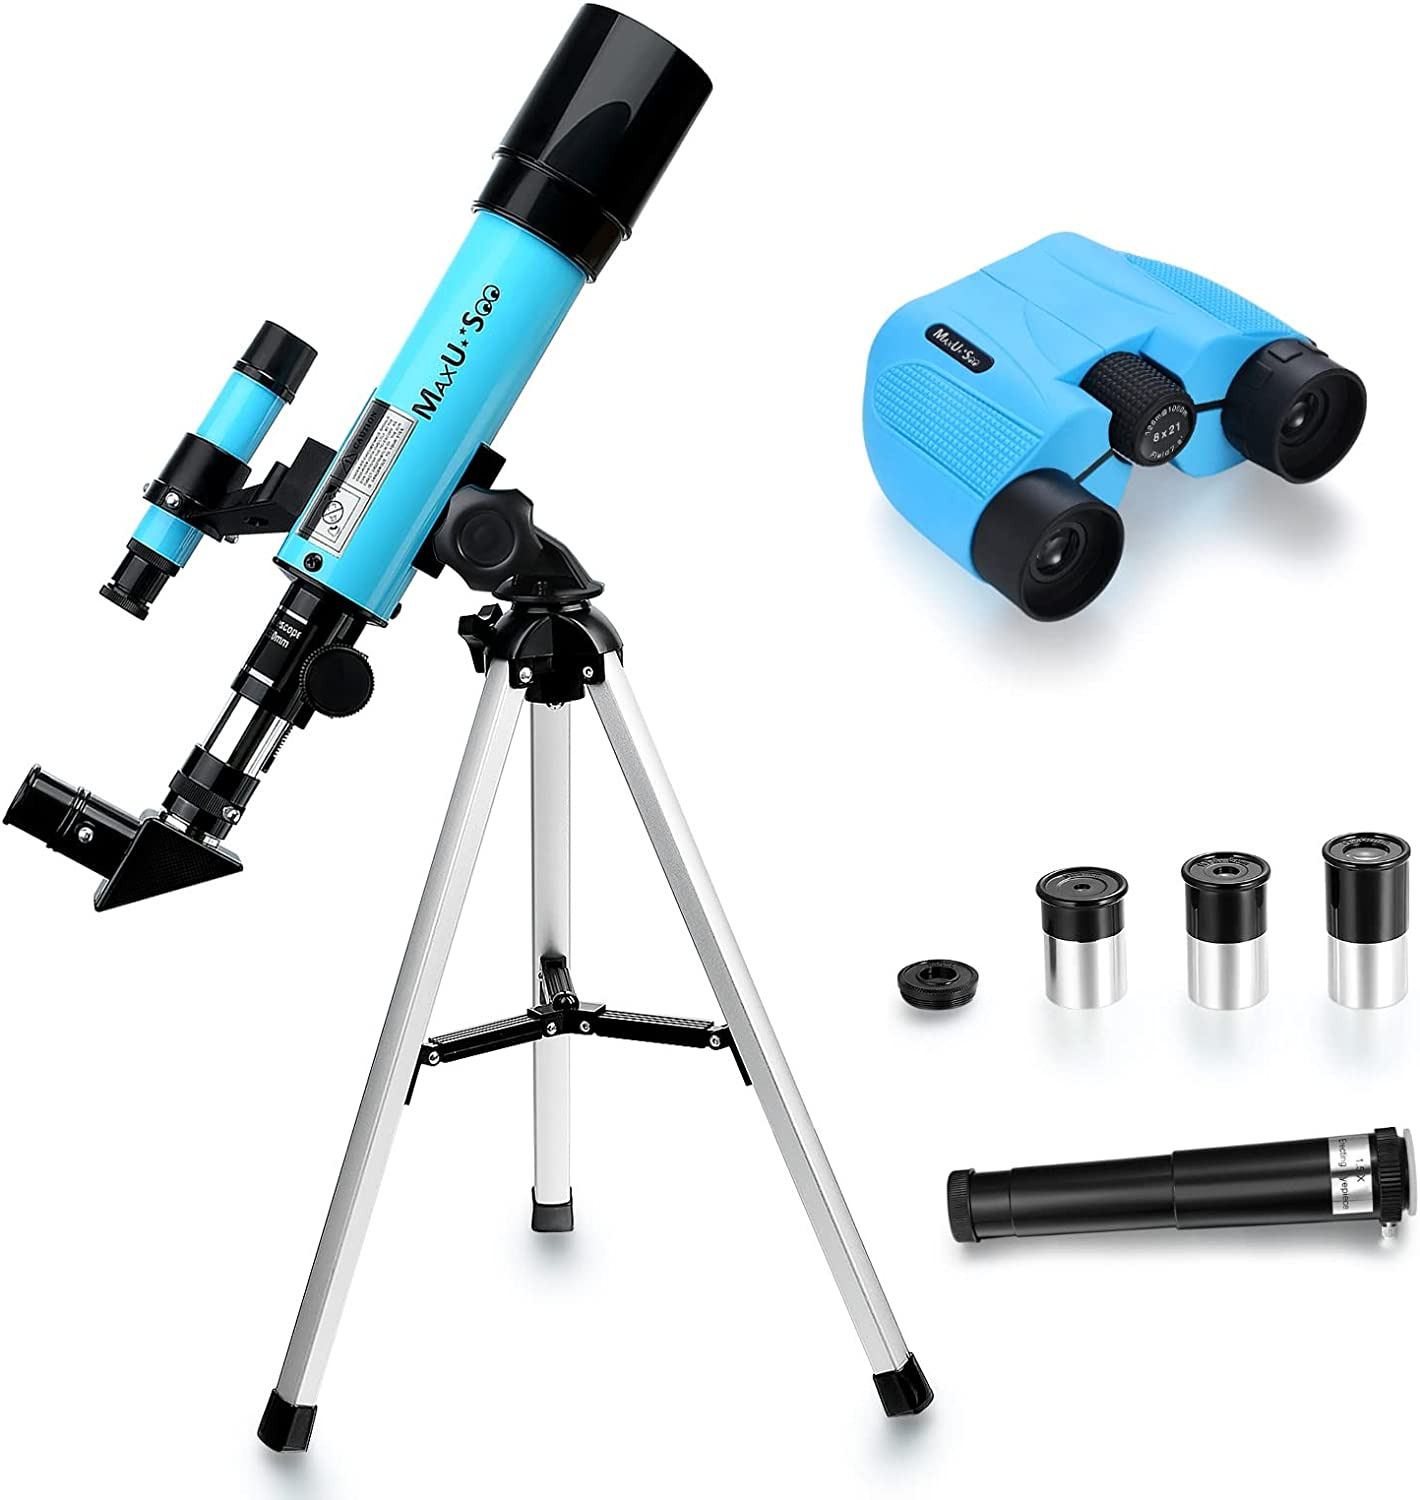 Lunar Telescope for Kids and Astronomy Beginners, Refractor Telescope with Finde